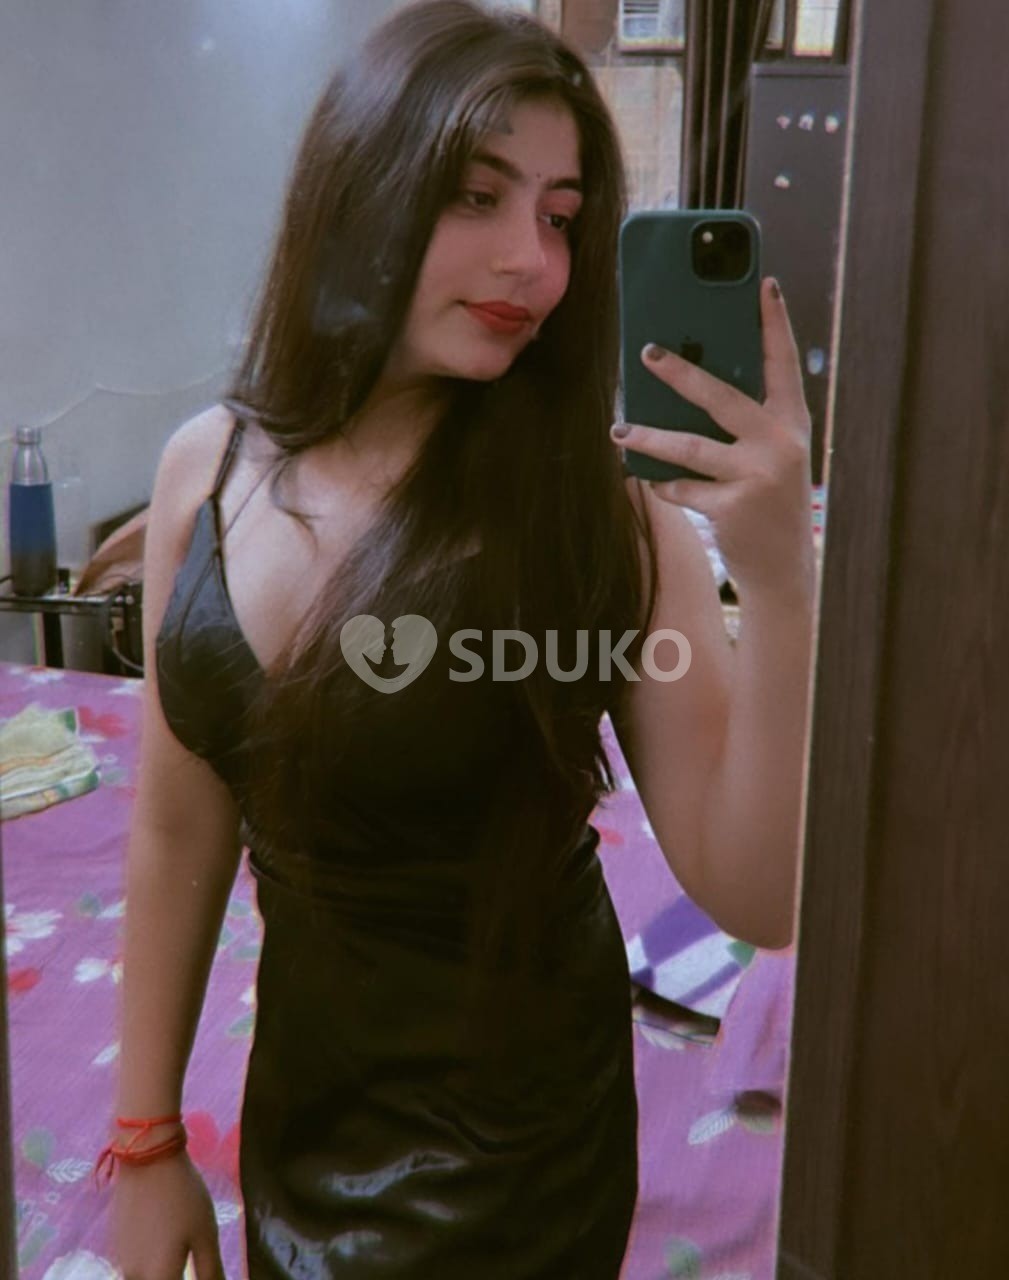 Jaipur ⭐ ⭐ Genuine ..Best Vvip High Profile College And Bhabhis Safe Escort Service Available